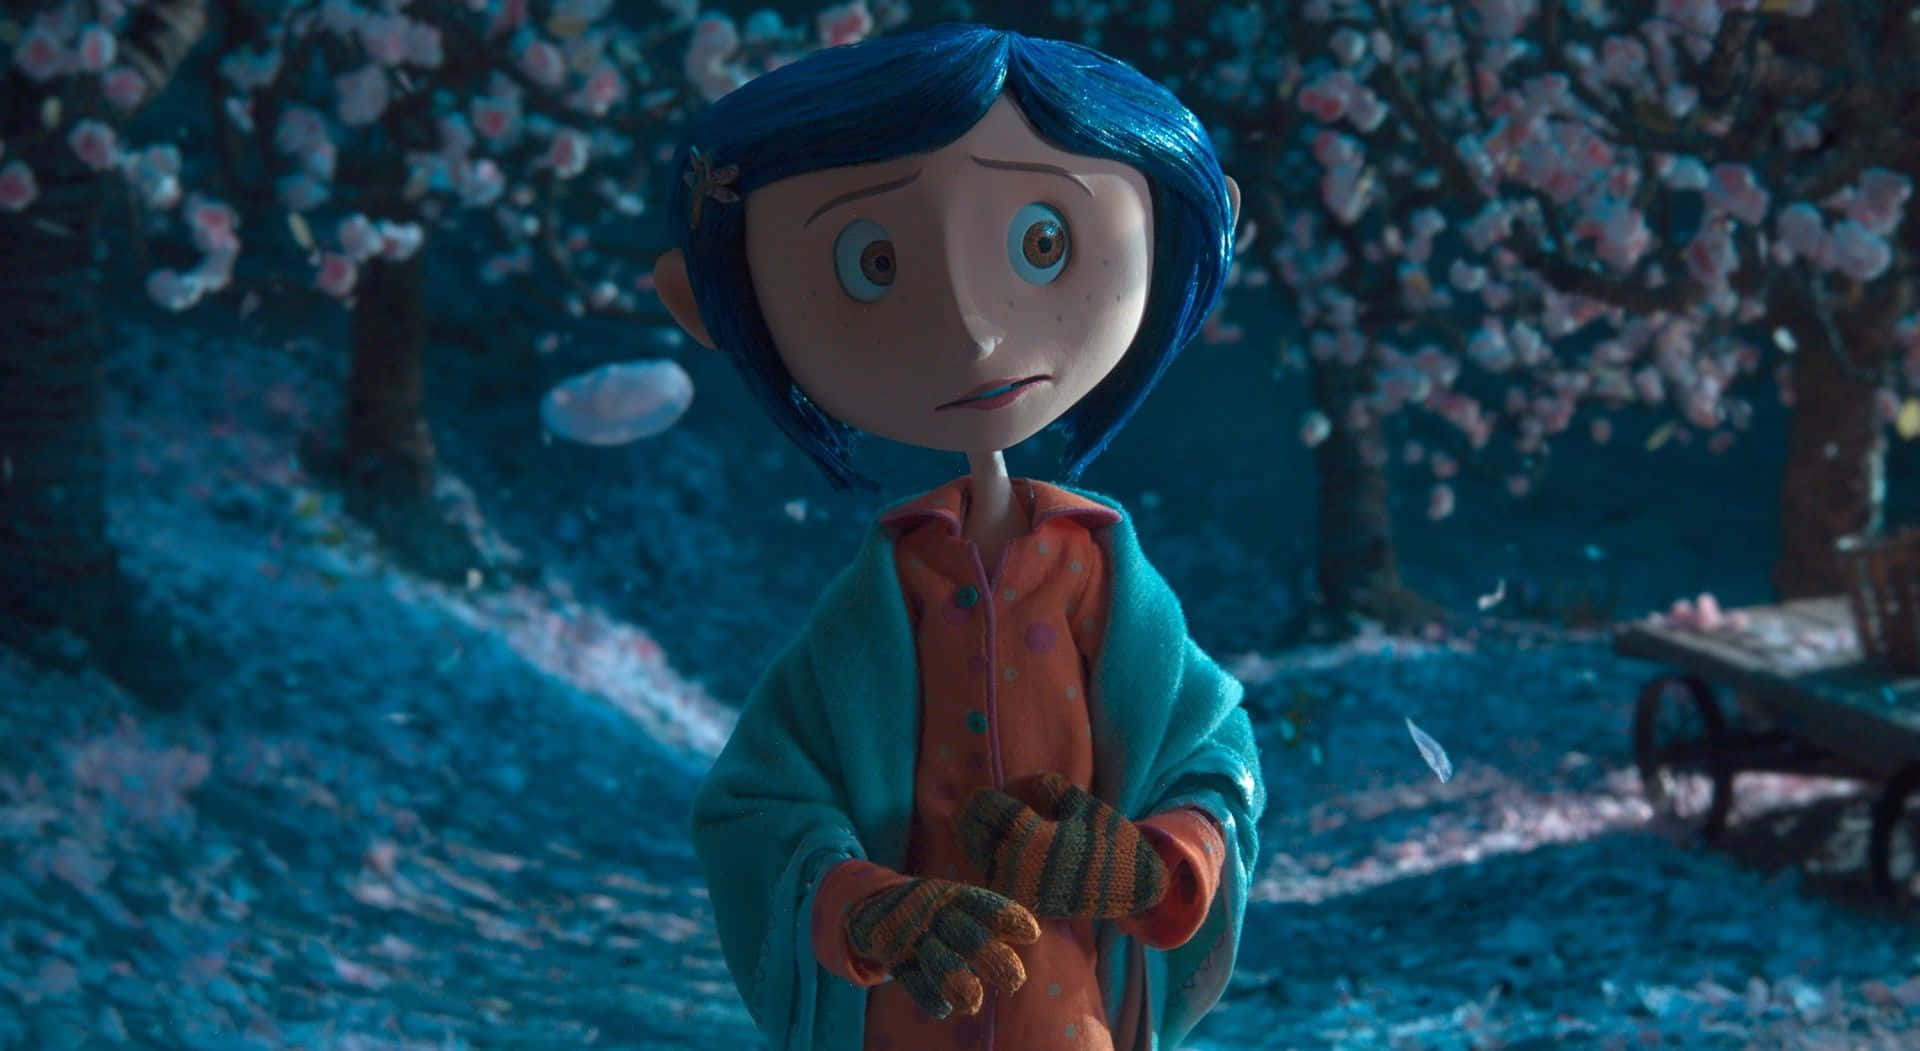 Coraline discovers a mysterious door in her new home